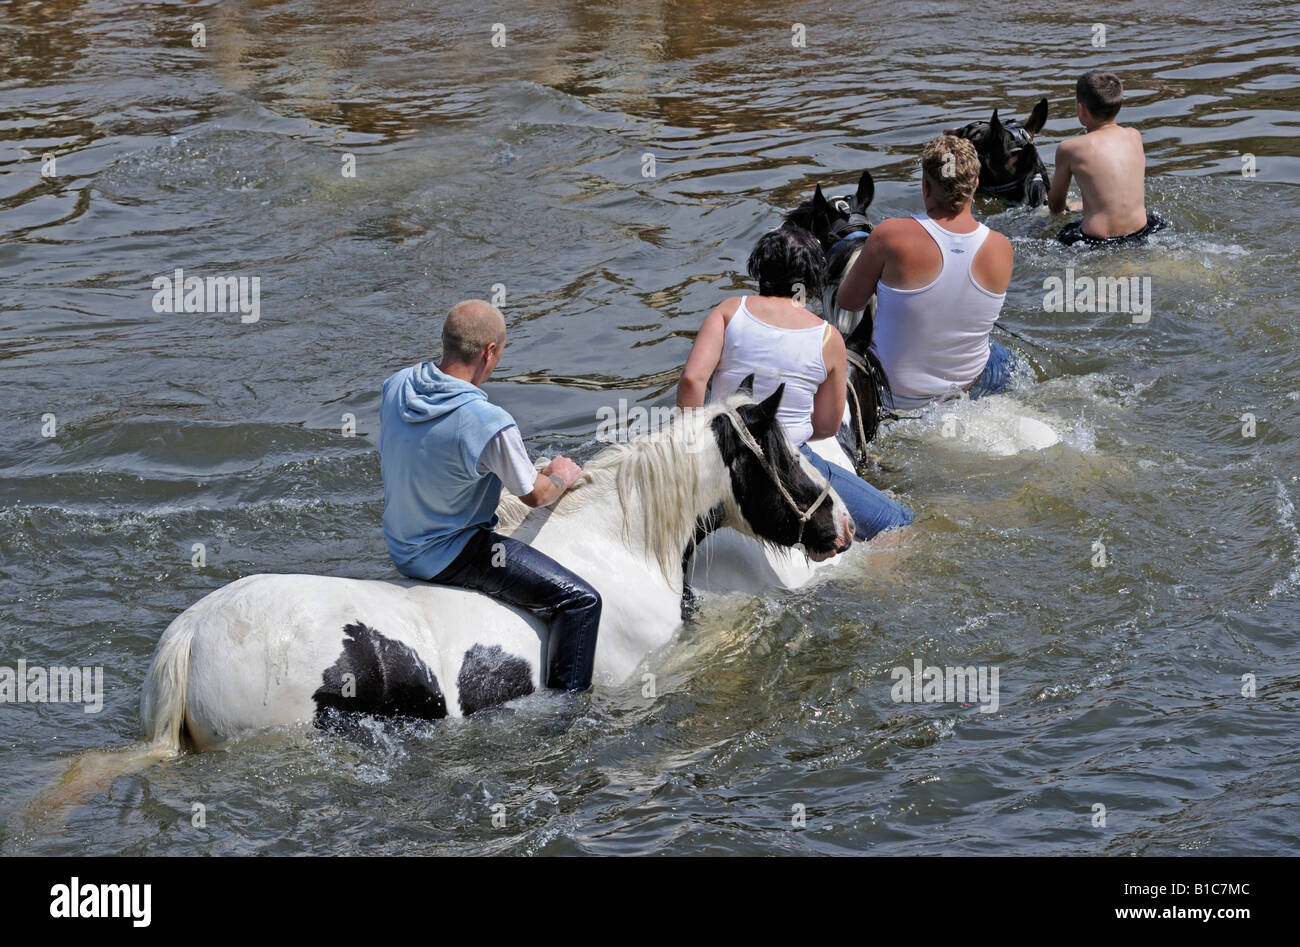 Gypsy travellers riding in River Eden. Appleby Horse Fair. Appleby-in-Westmorland, Cumbria, England, United Kingdom, Europe. Stock Photo